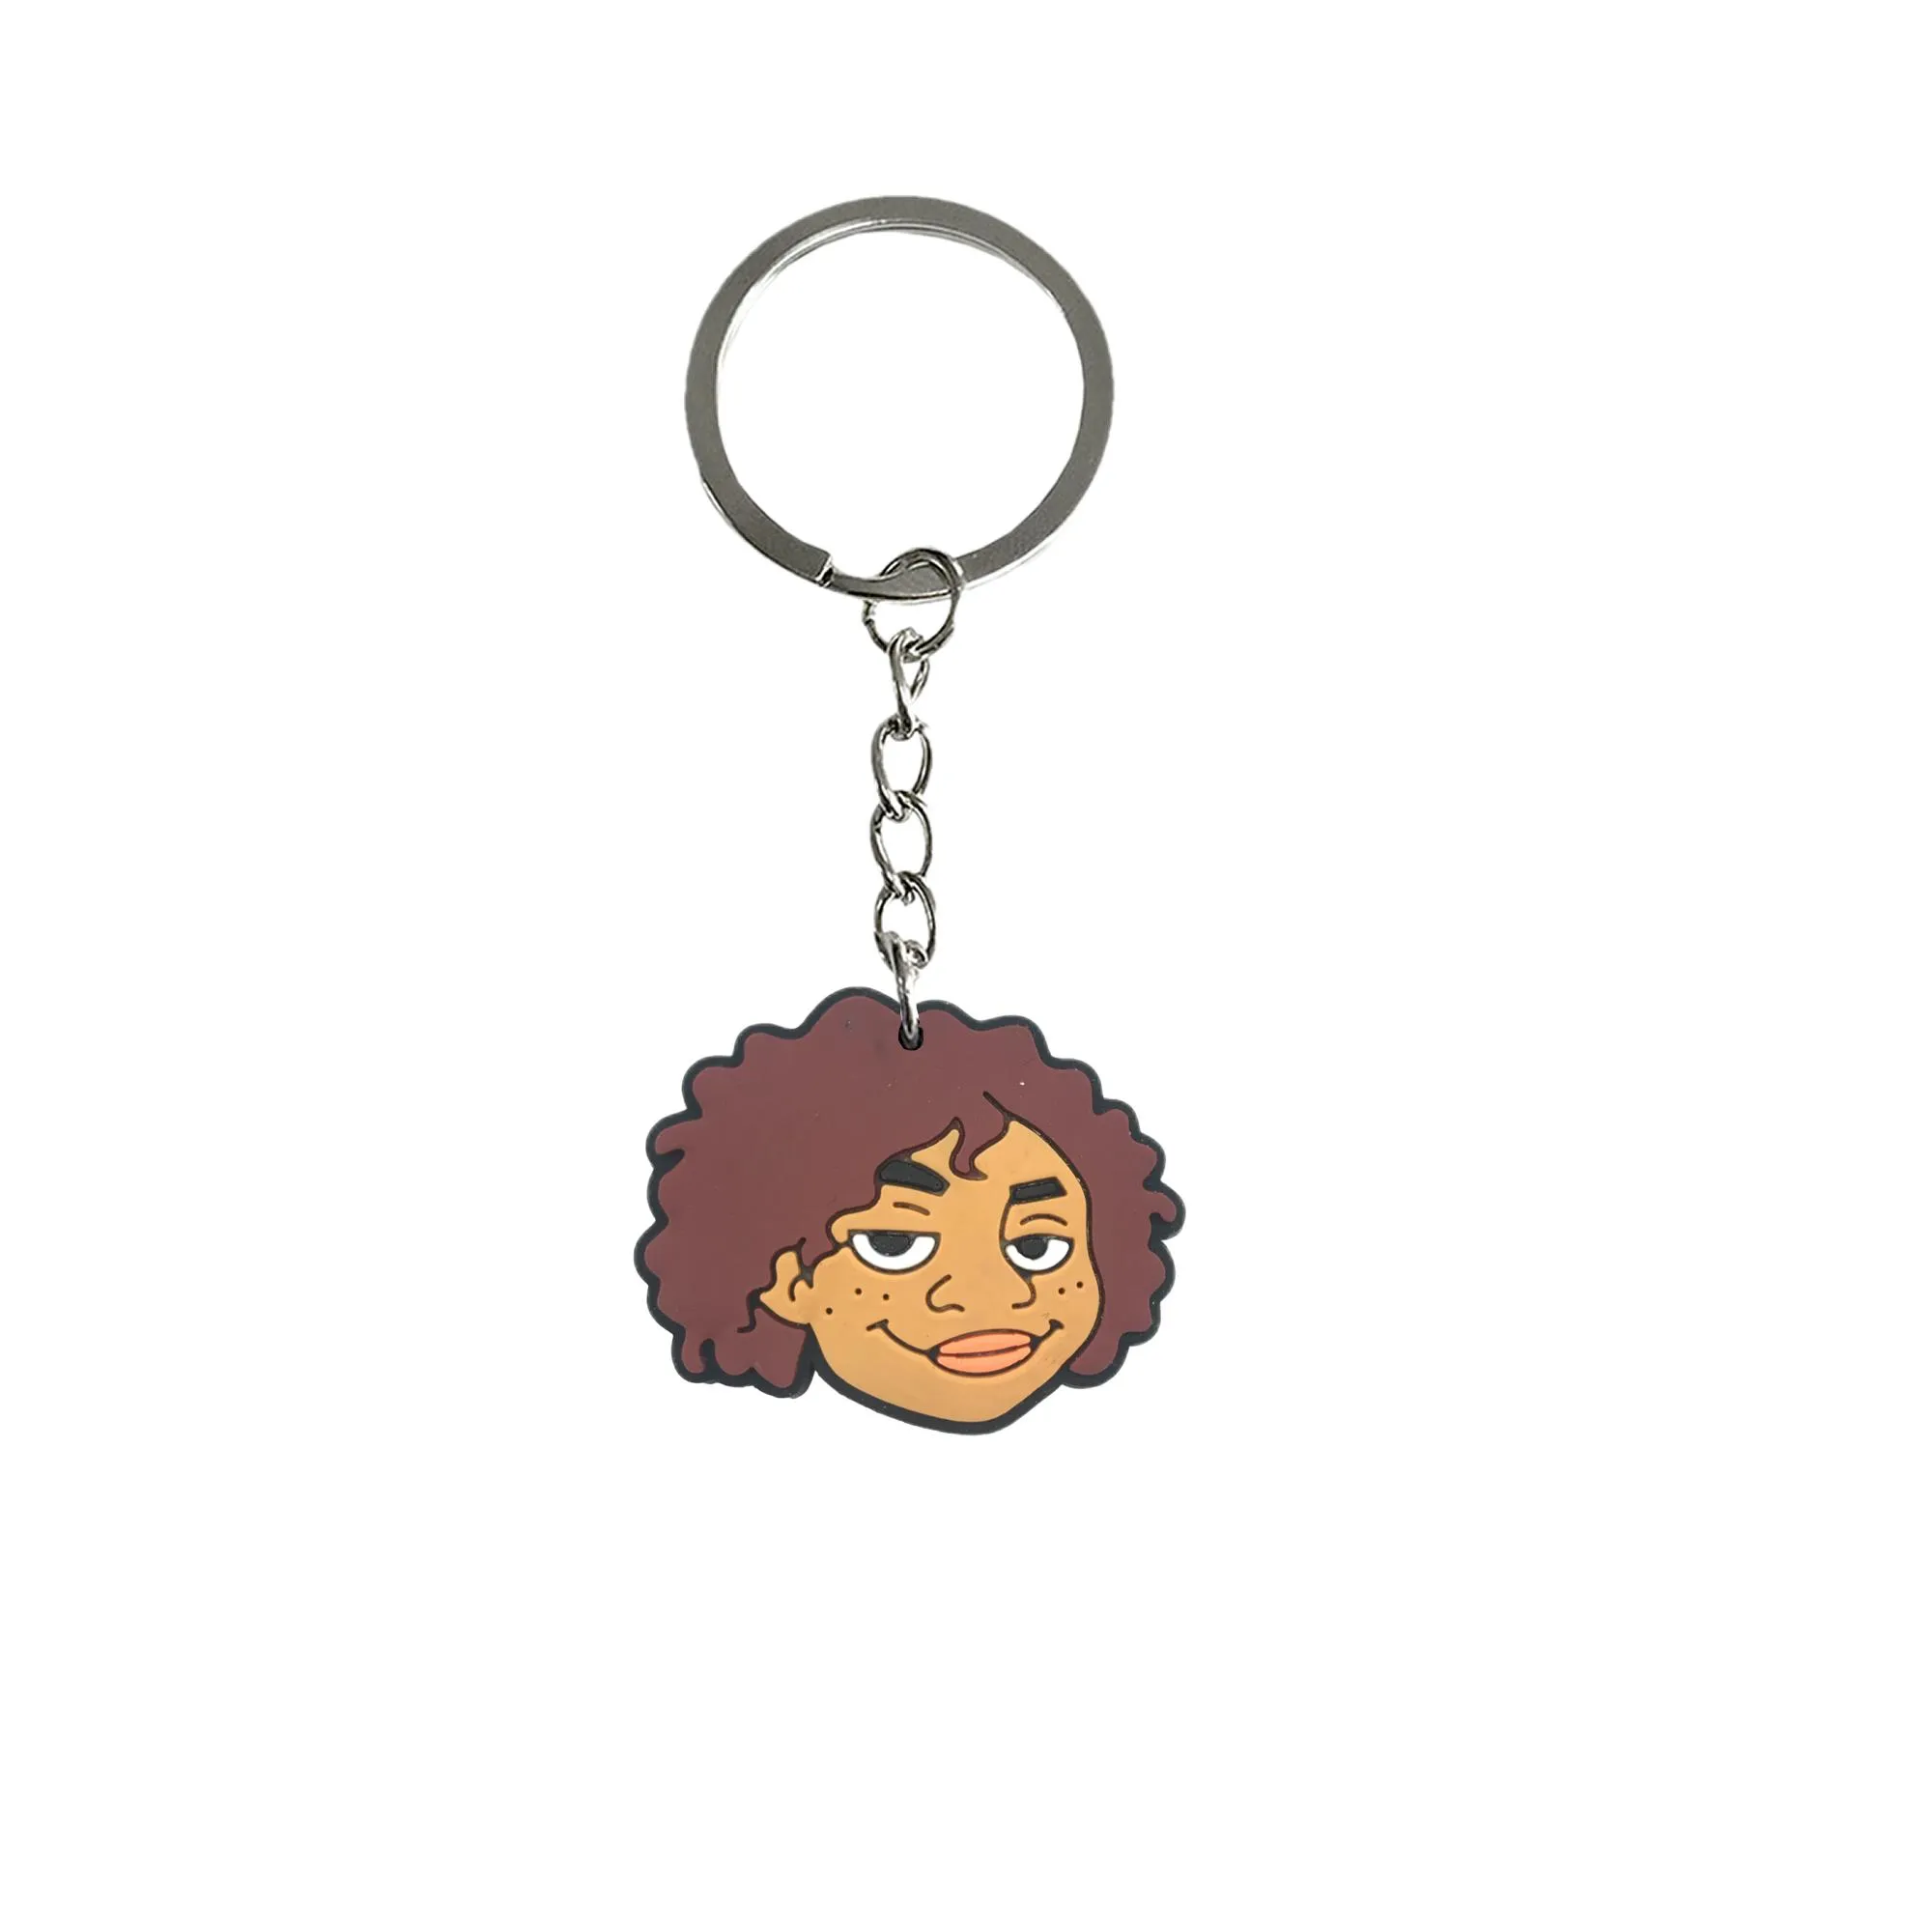 magic fills the room keychain keyring for backpack car charms boys keychains suitable schoolbag shoulder bag pendant accessories charm goodie stuffers supplies childrens party favors